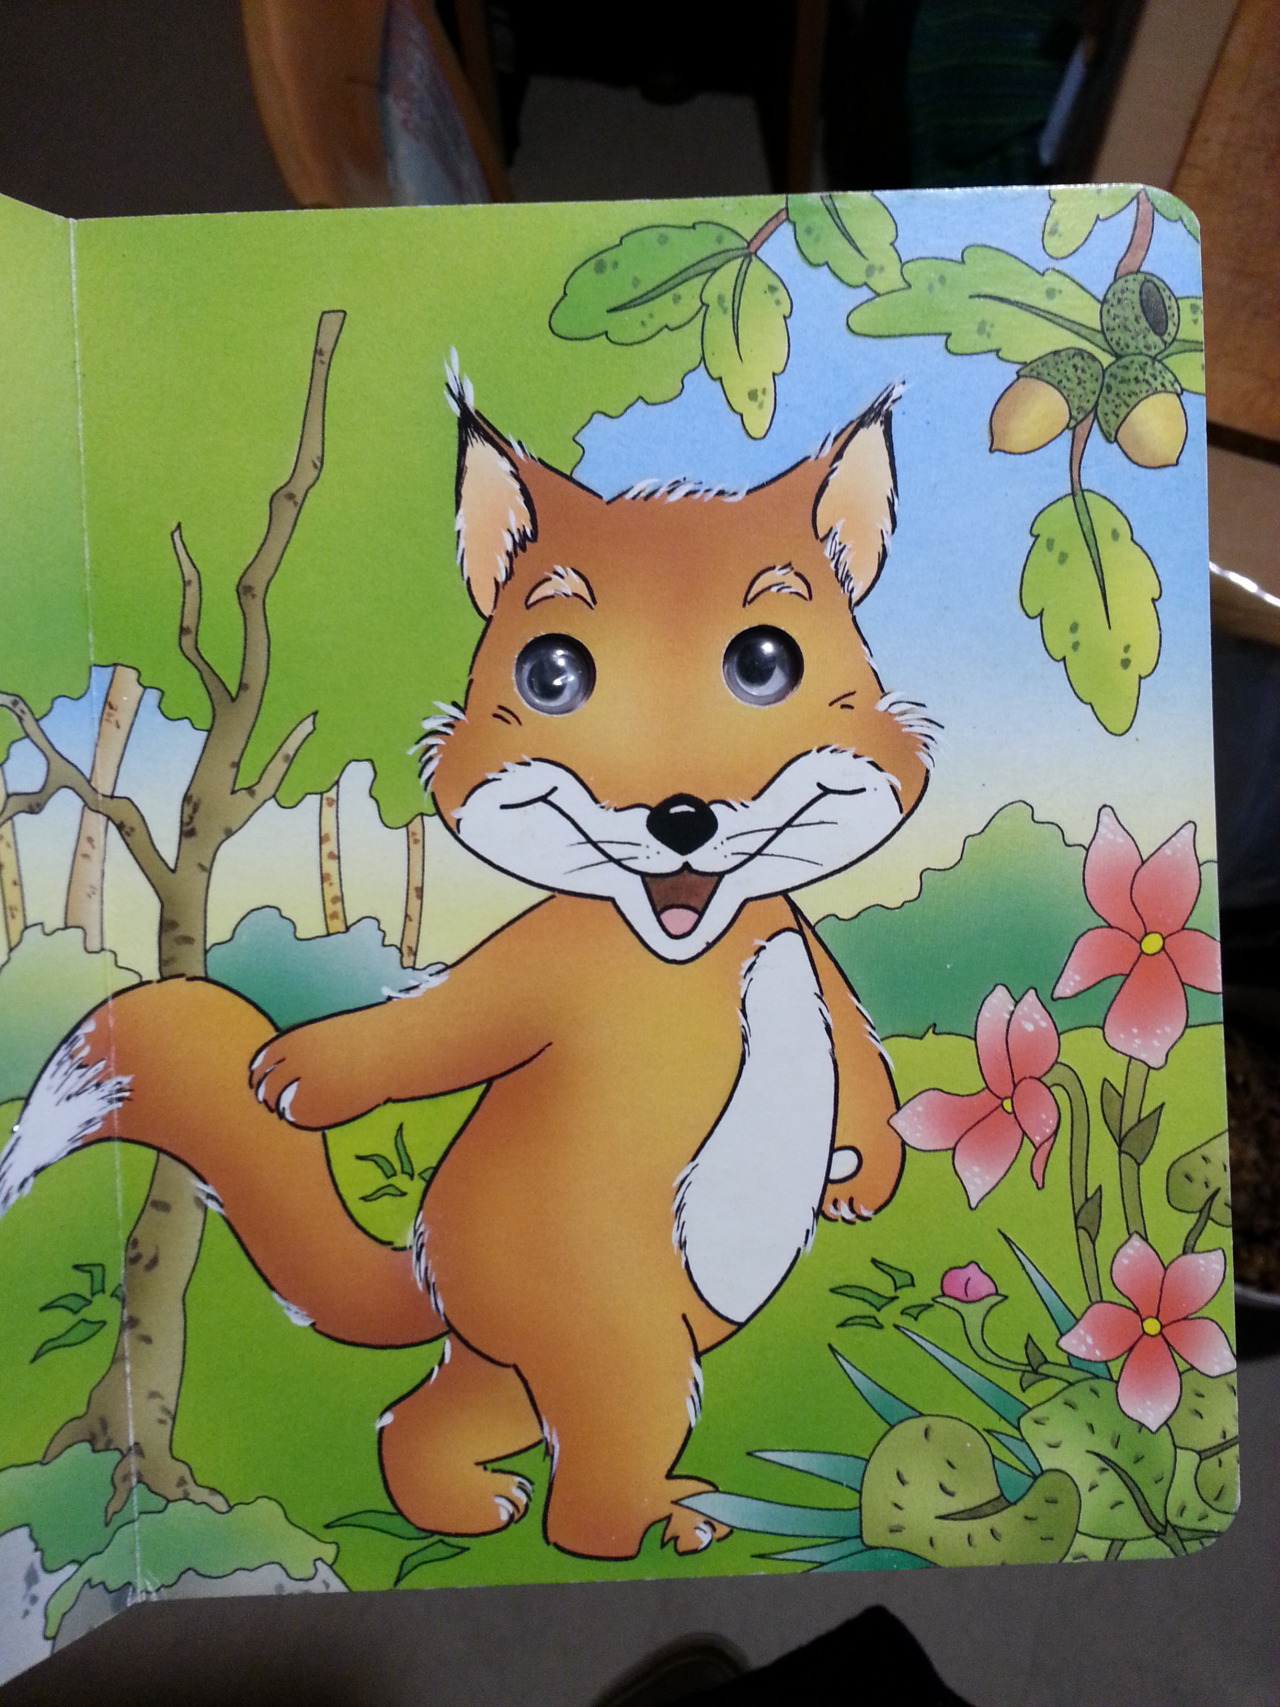 I was at my Grandma&rsquo;s place and saw this childrens book.All I could think